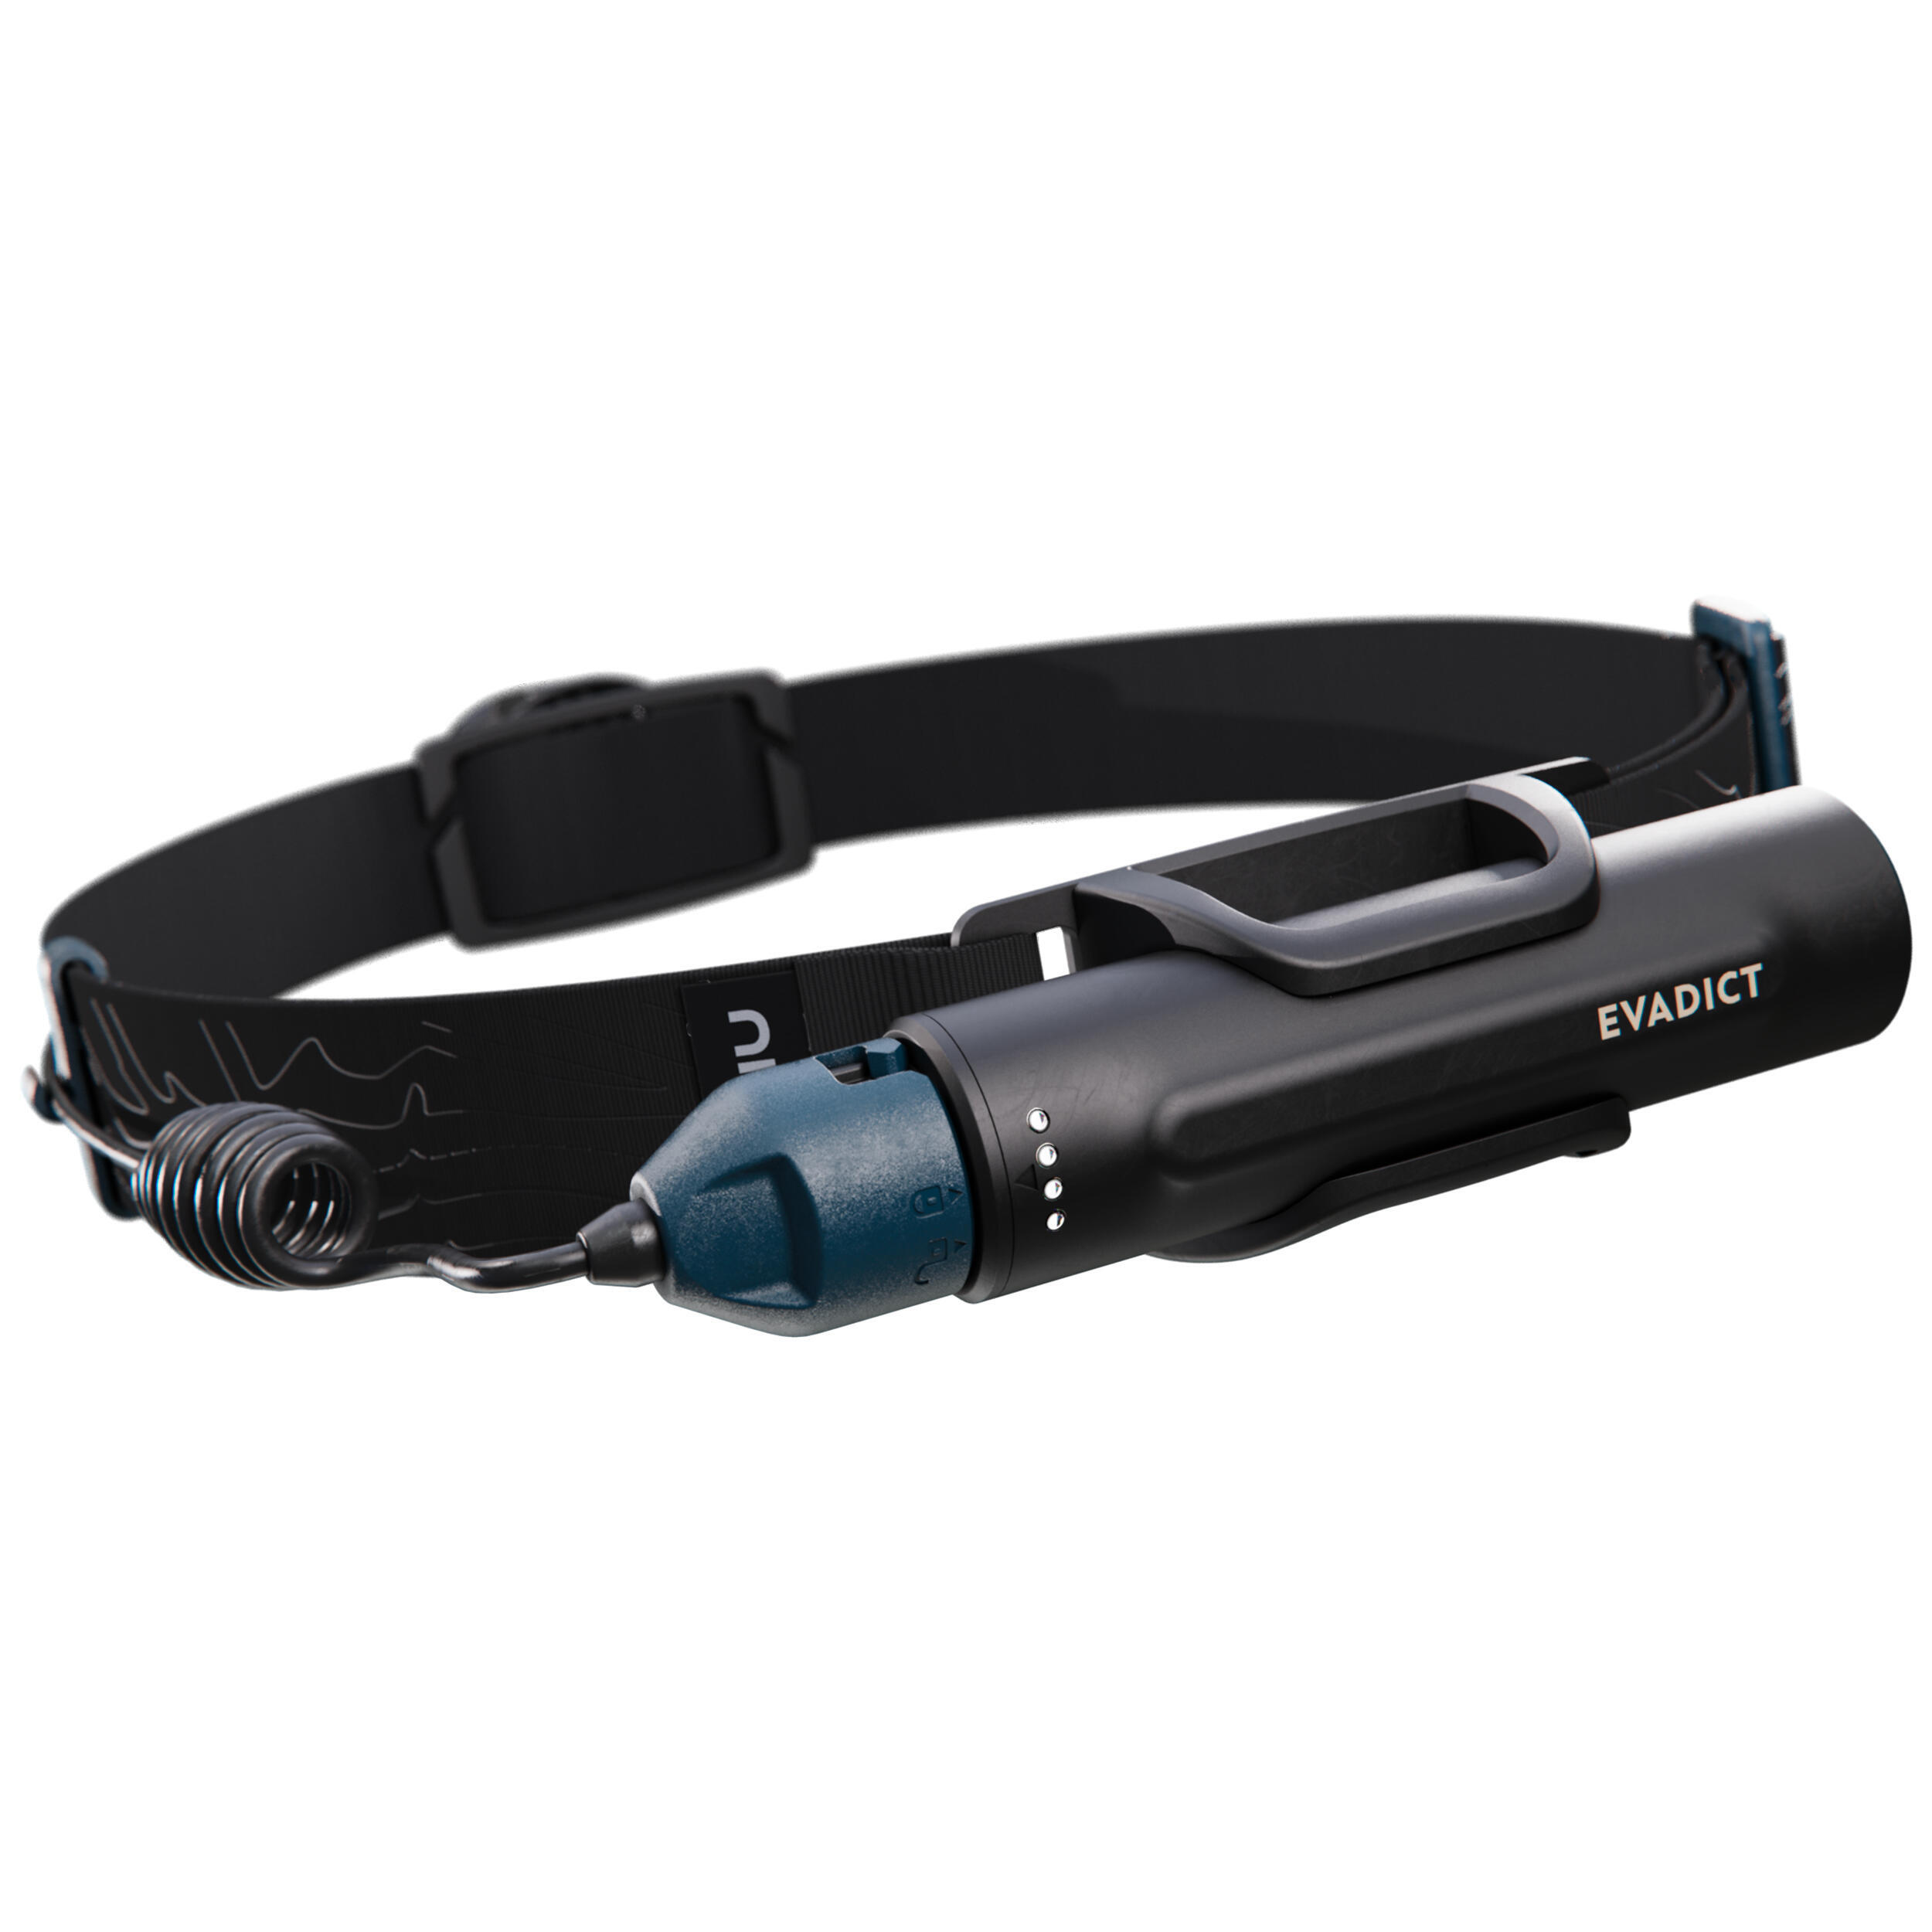 Evadict Ontrail 900 Lumens Trail Running Frontal Lamp  3/11